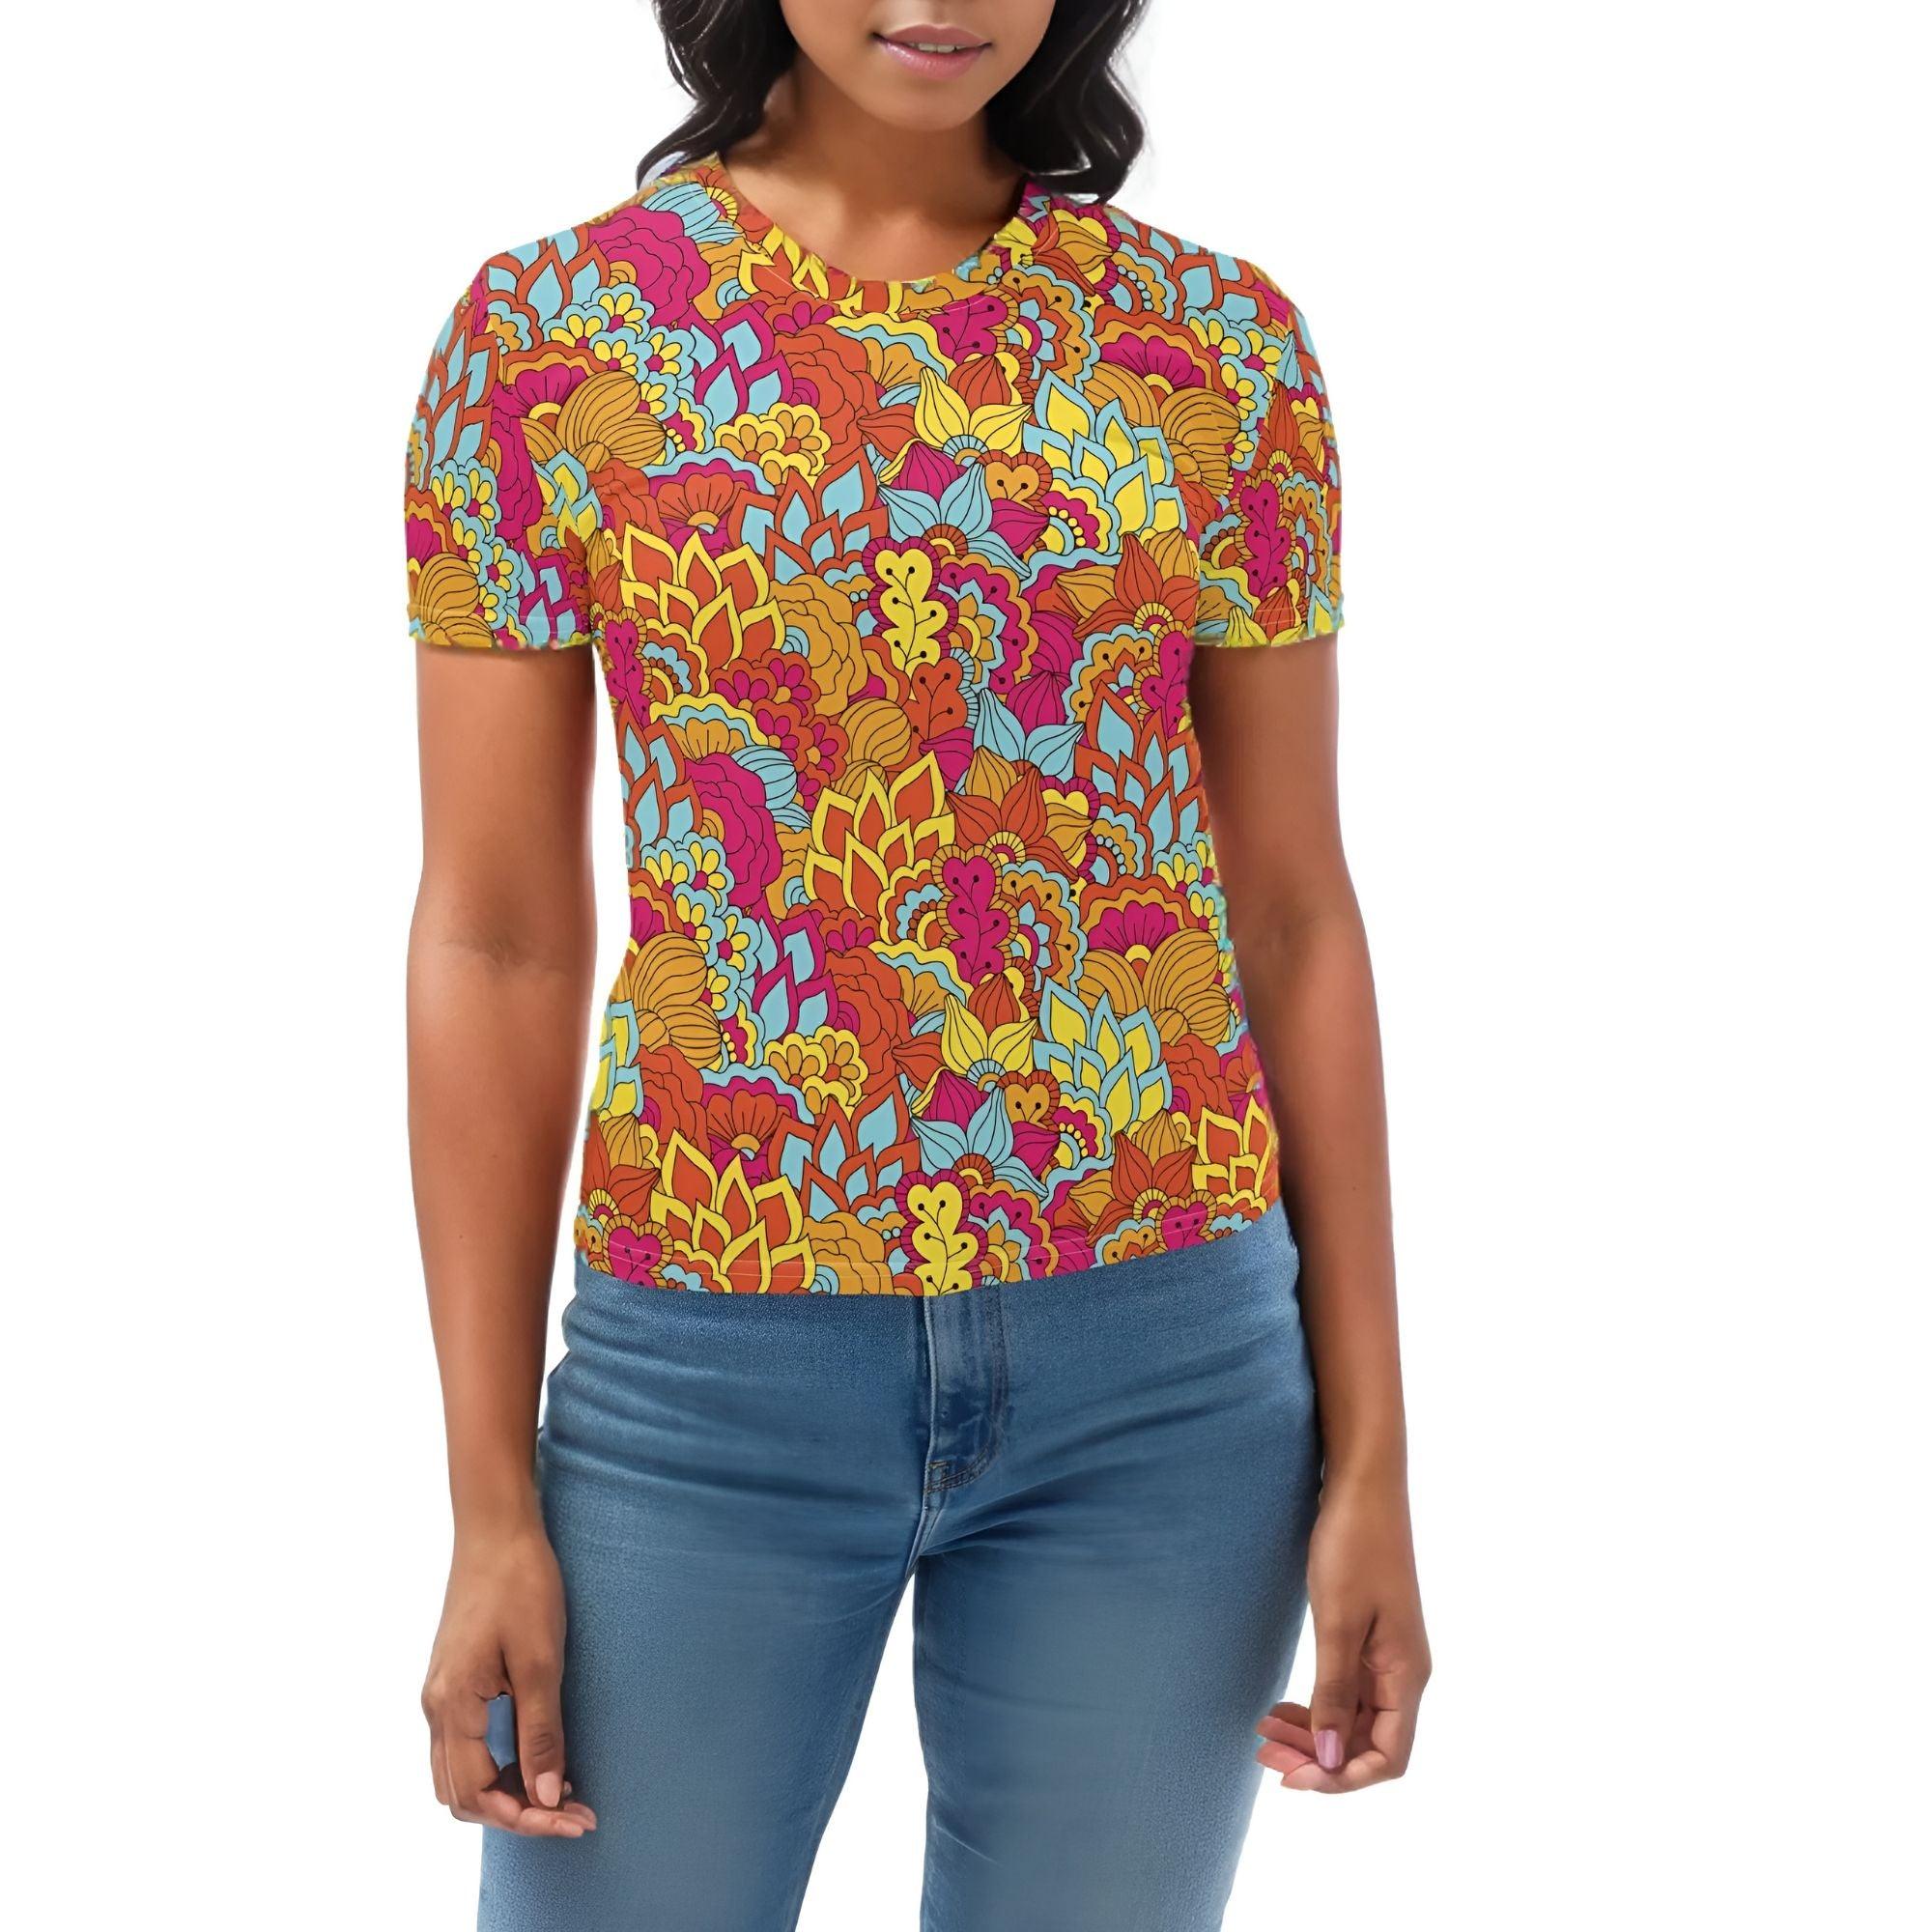 Inela Women's Crew Neck T-shirt - Retro Flower Power Floral  Red Yellow Pink Psychedelic Bold All Over Print